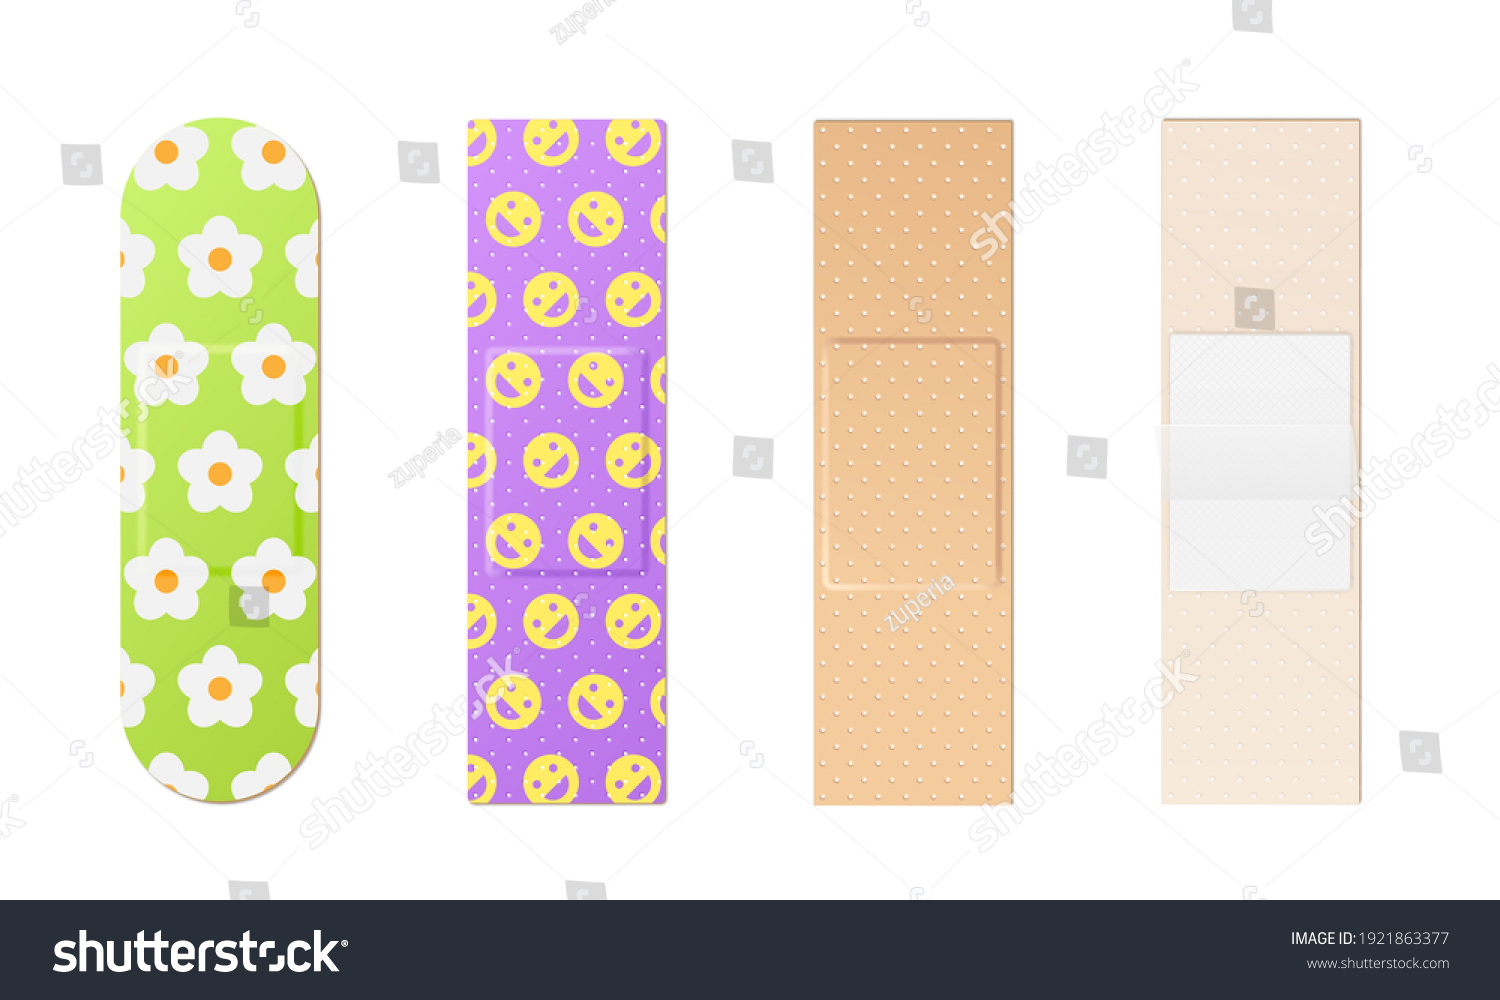 Adhesive bandage set. Elastic medical plasters and patches classic and colorful for kids front and back view isolated on white background.3d vector illustration #1921863377